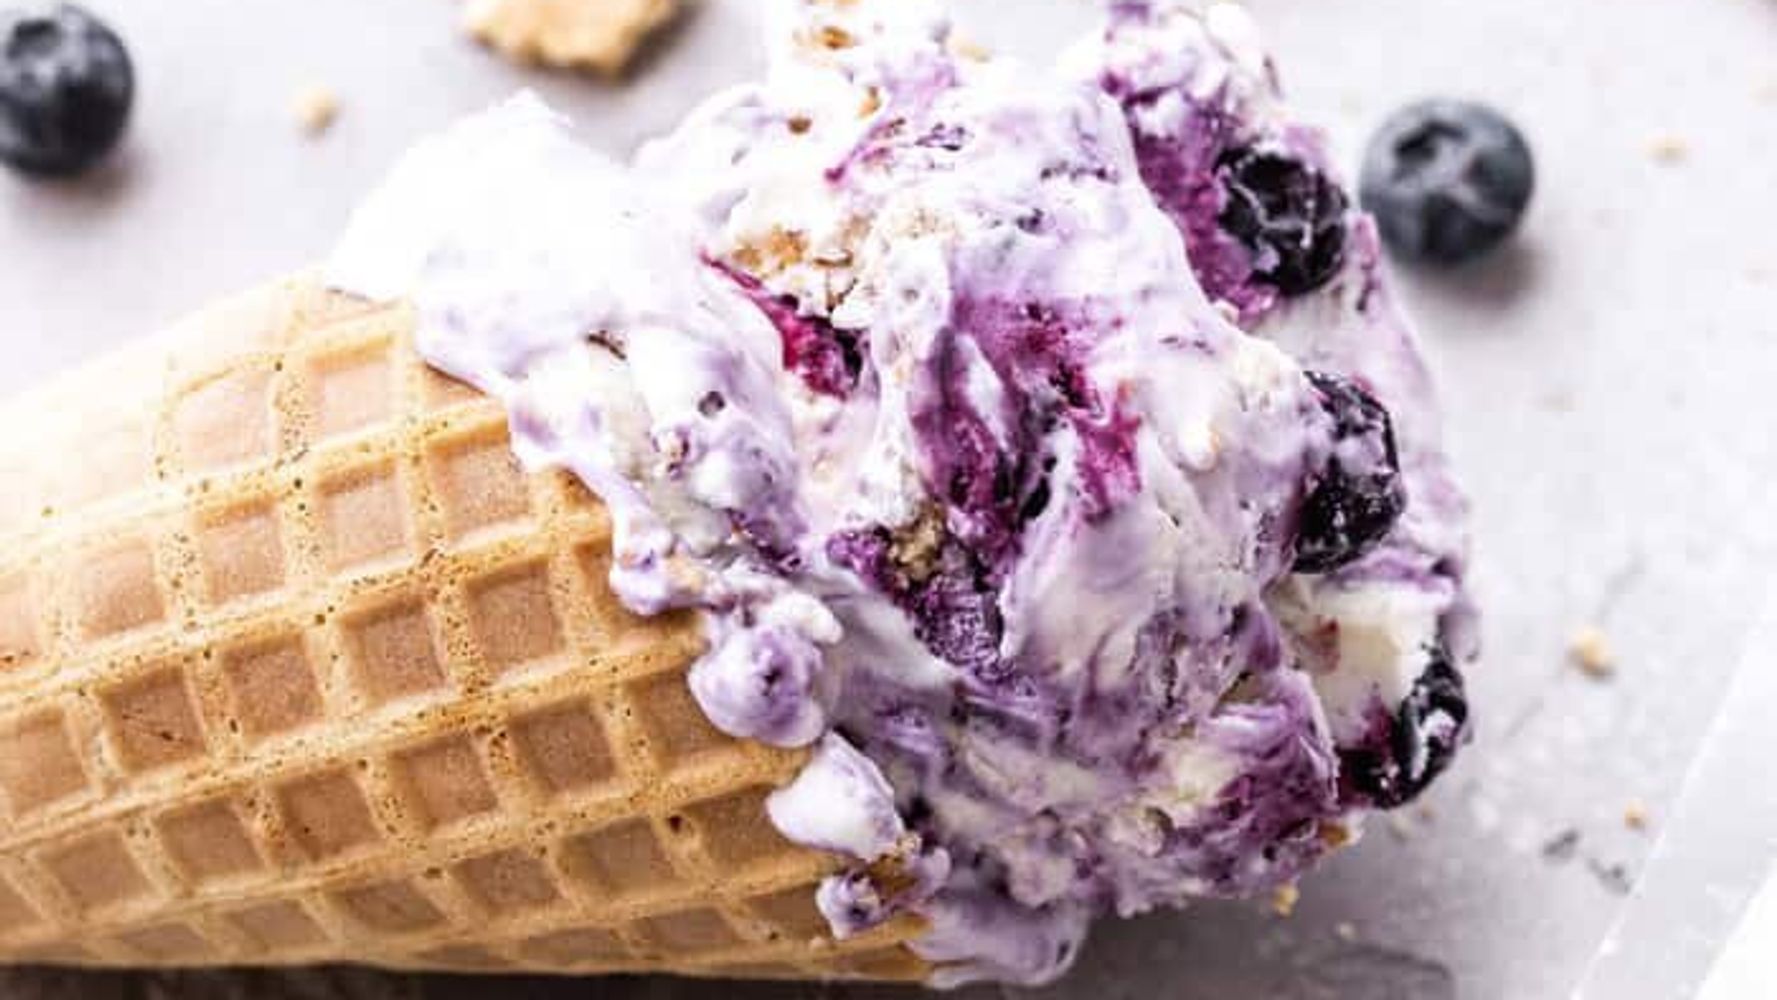 19 No-Churn Ice Cream Recipes You Can Make Without A Machine